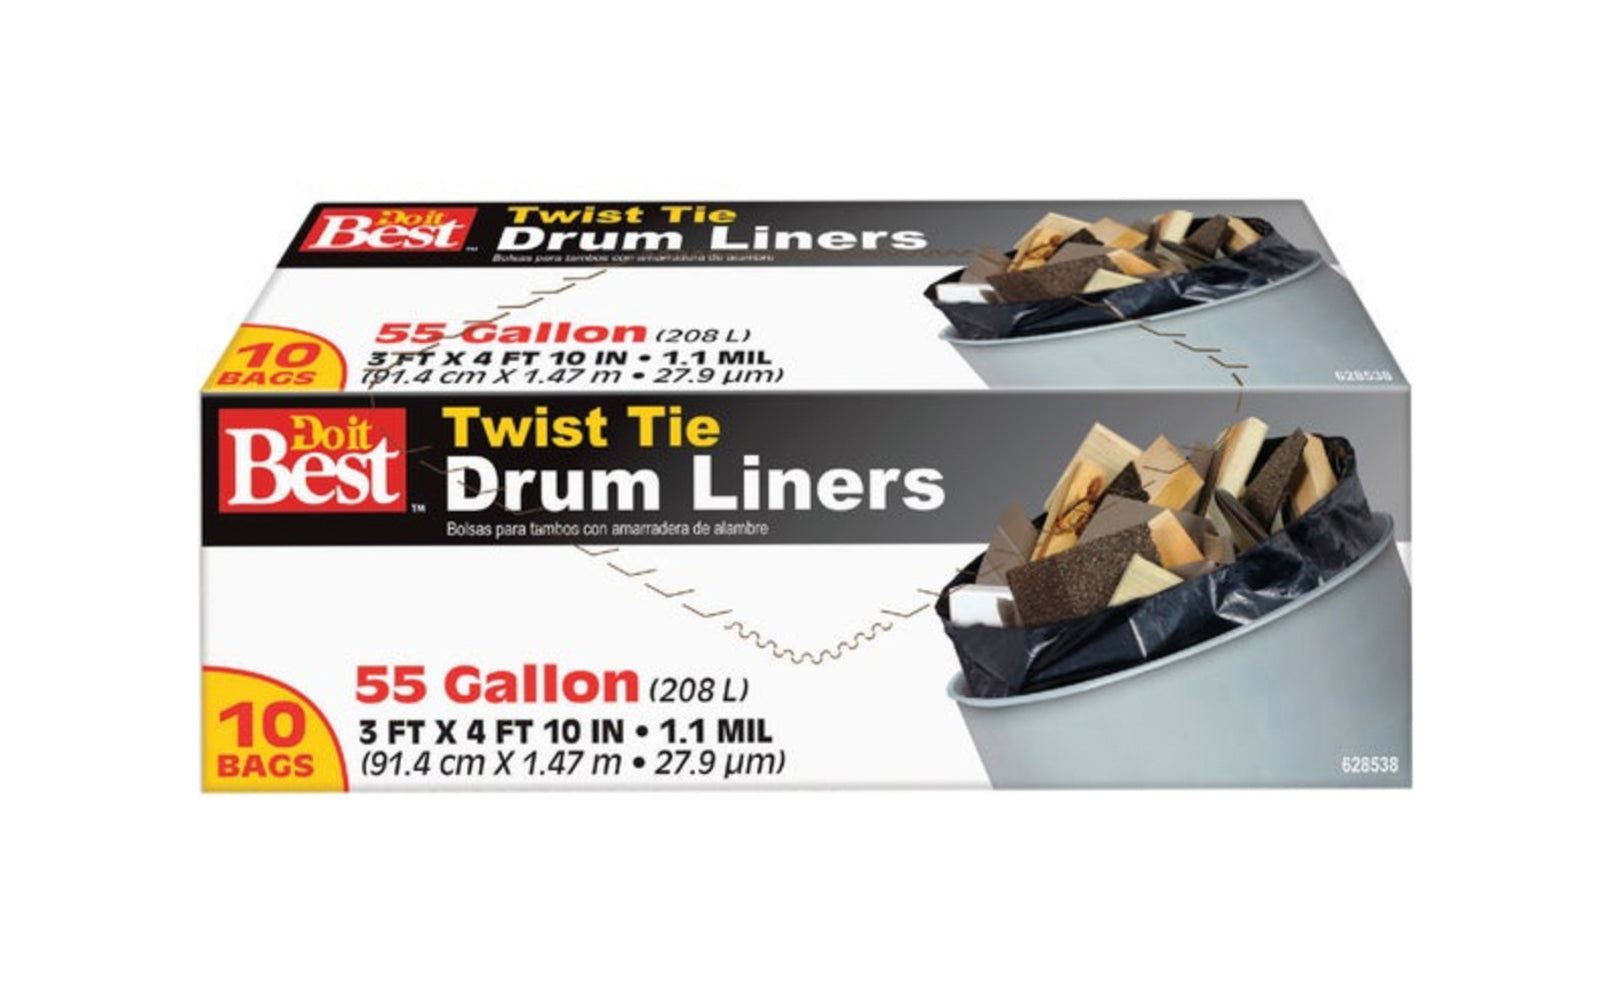 55 Gallon Twist Tie Drum Drum Liner Bags ~ 10 Bags. Black color bags. Made by Do It Best. Made in USA.